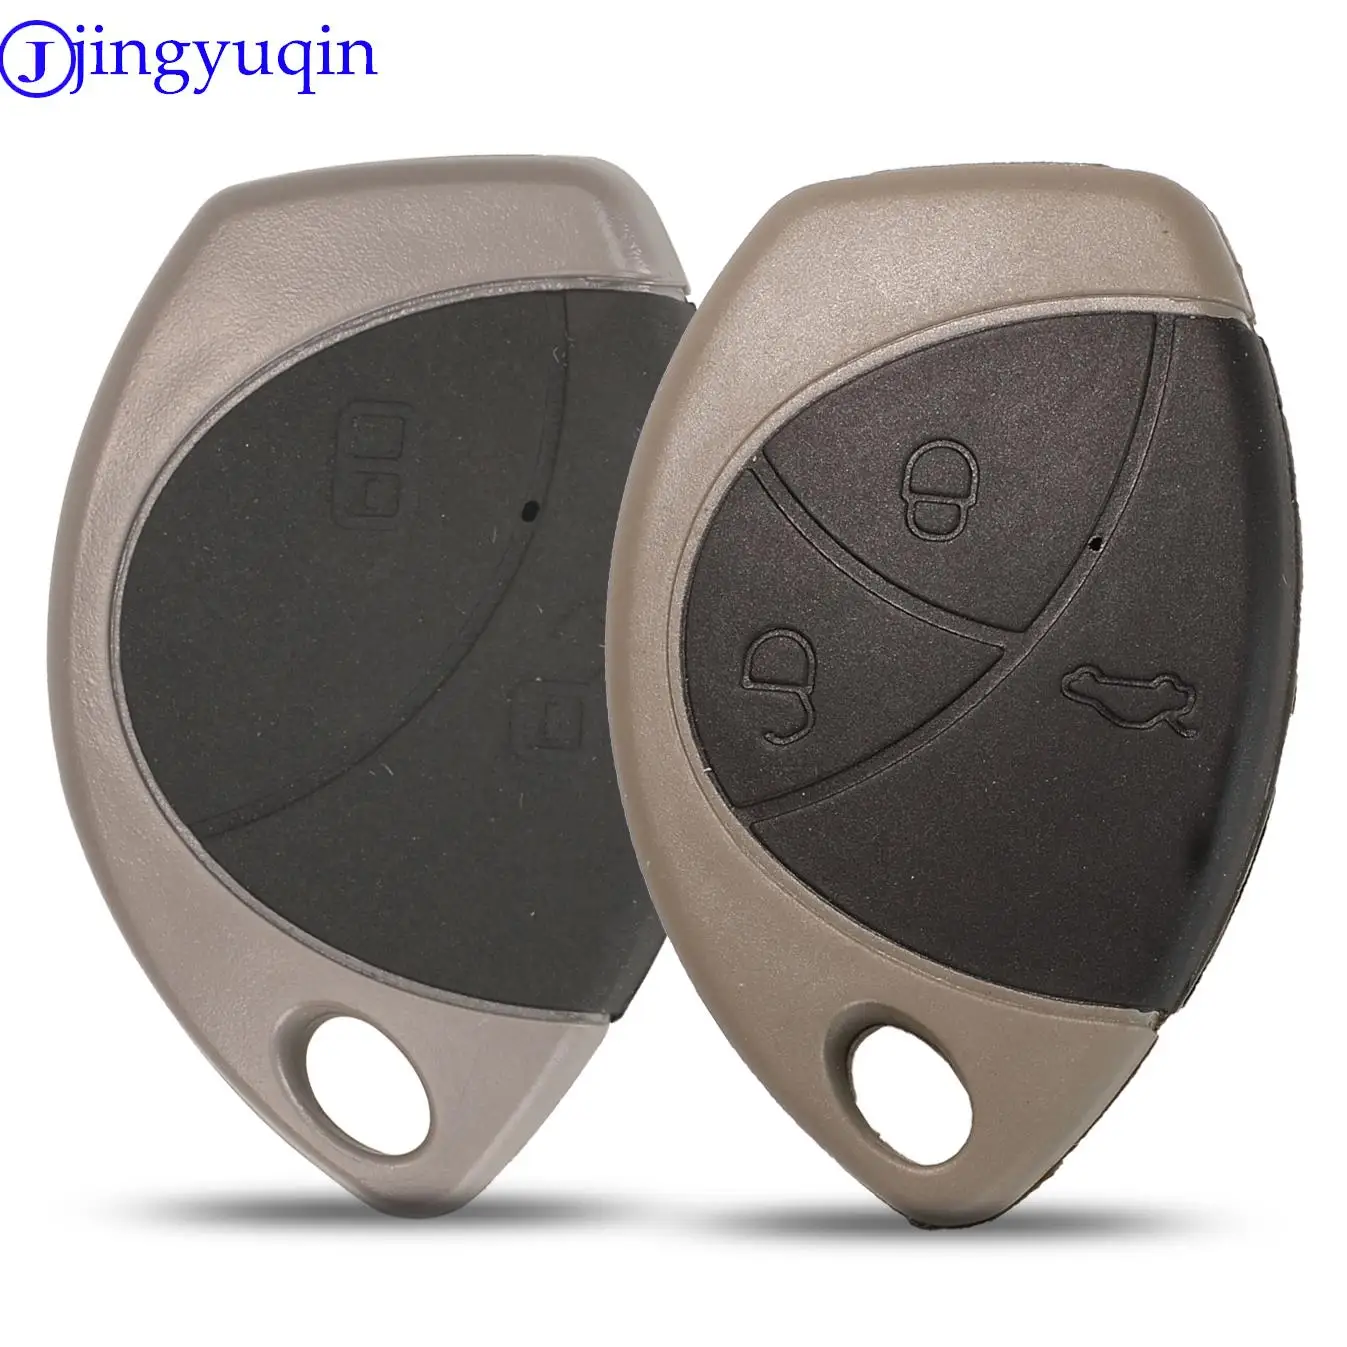 

jingyuqin For Malaysia Toyota Remote key shell 2/3 buttons Fob Key Blank Cover Replacement Case